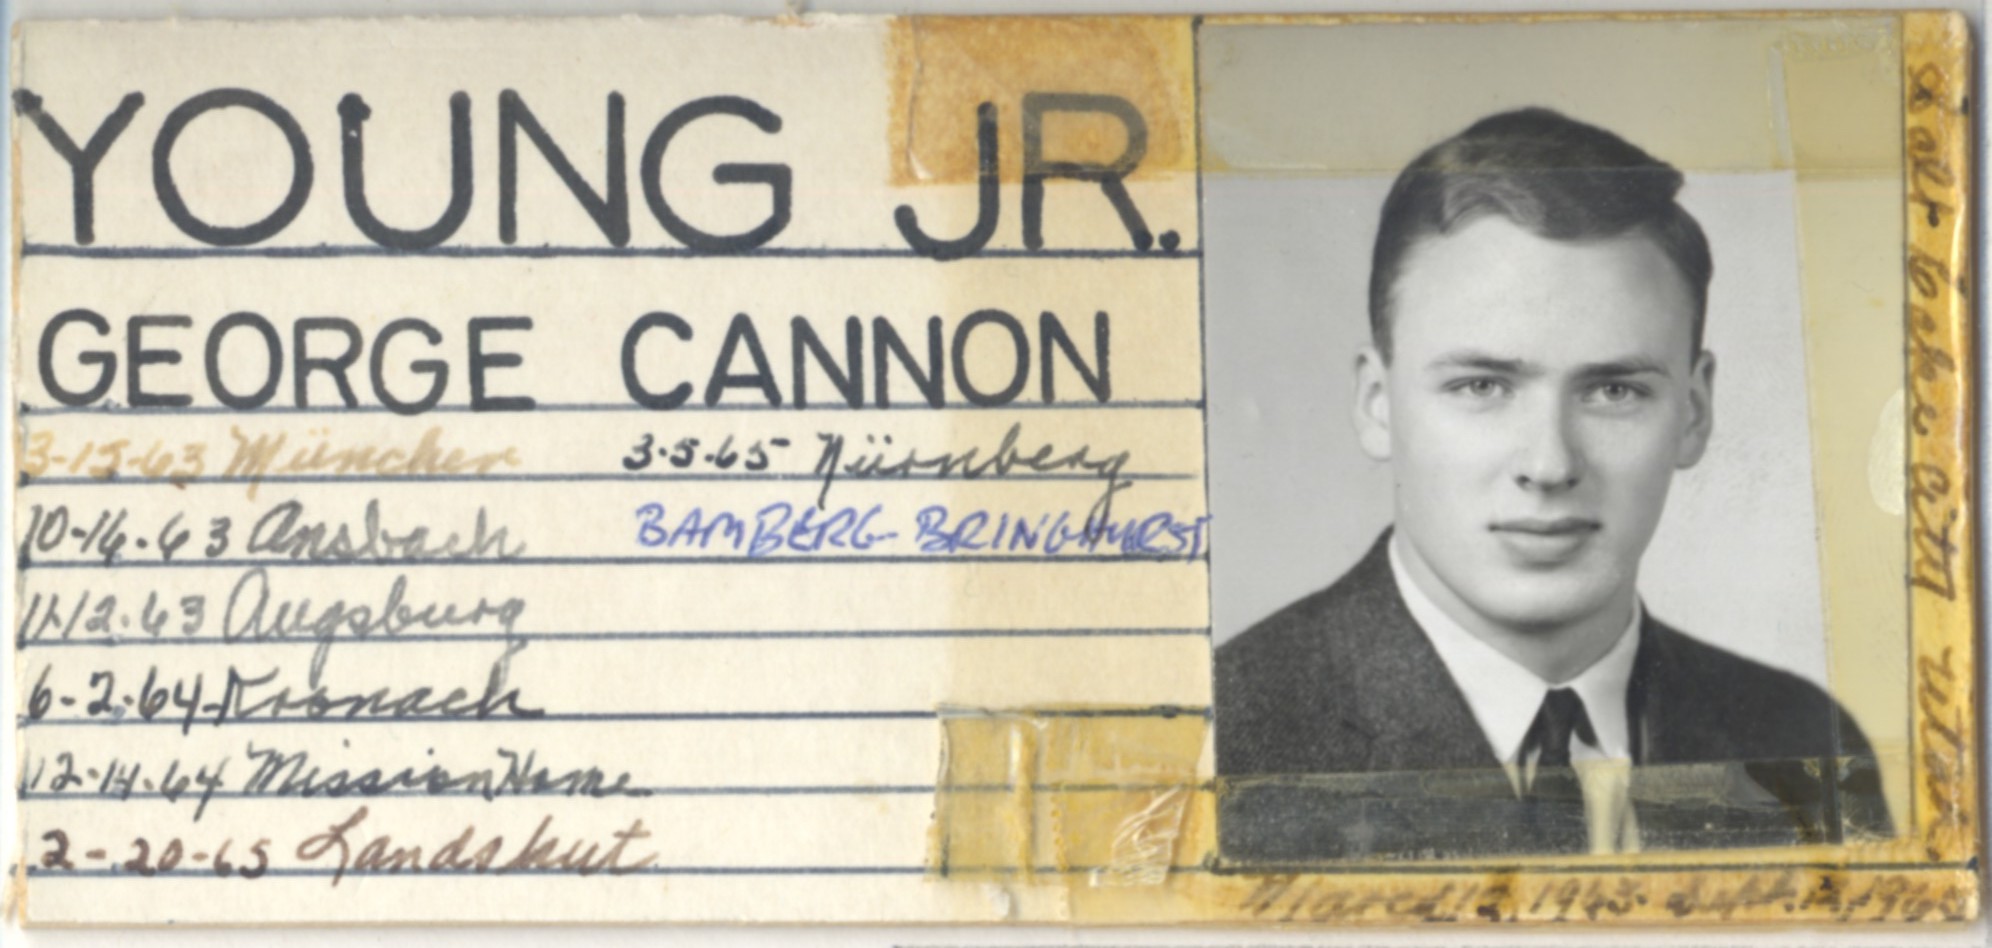 Young Jr, George Cannon